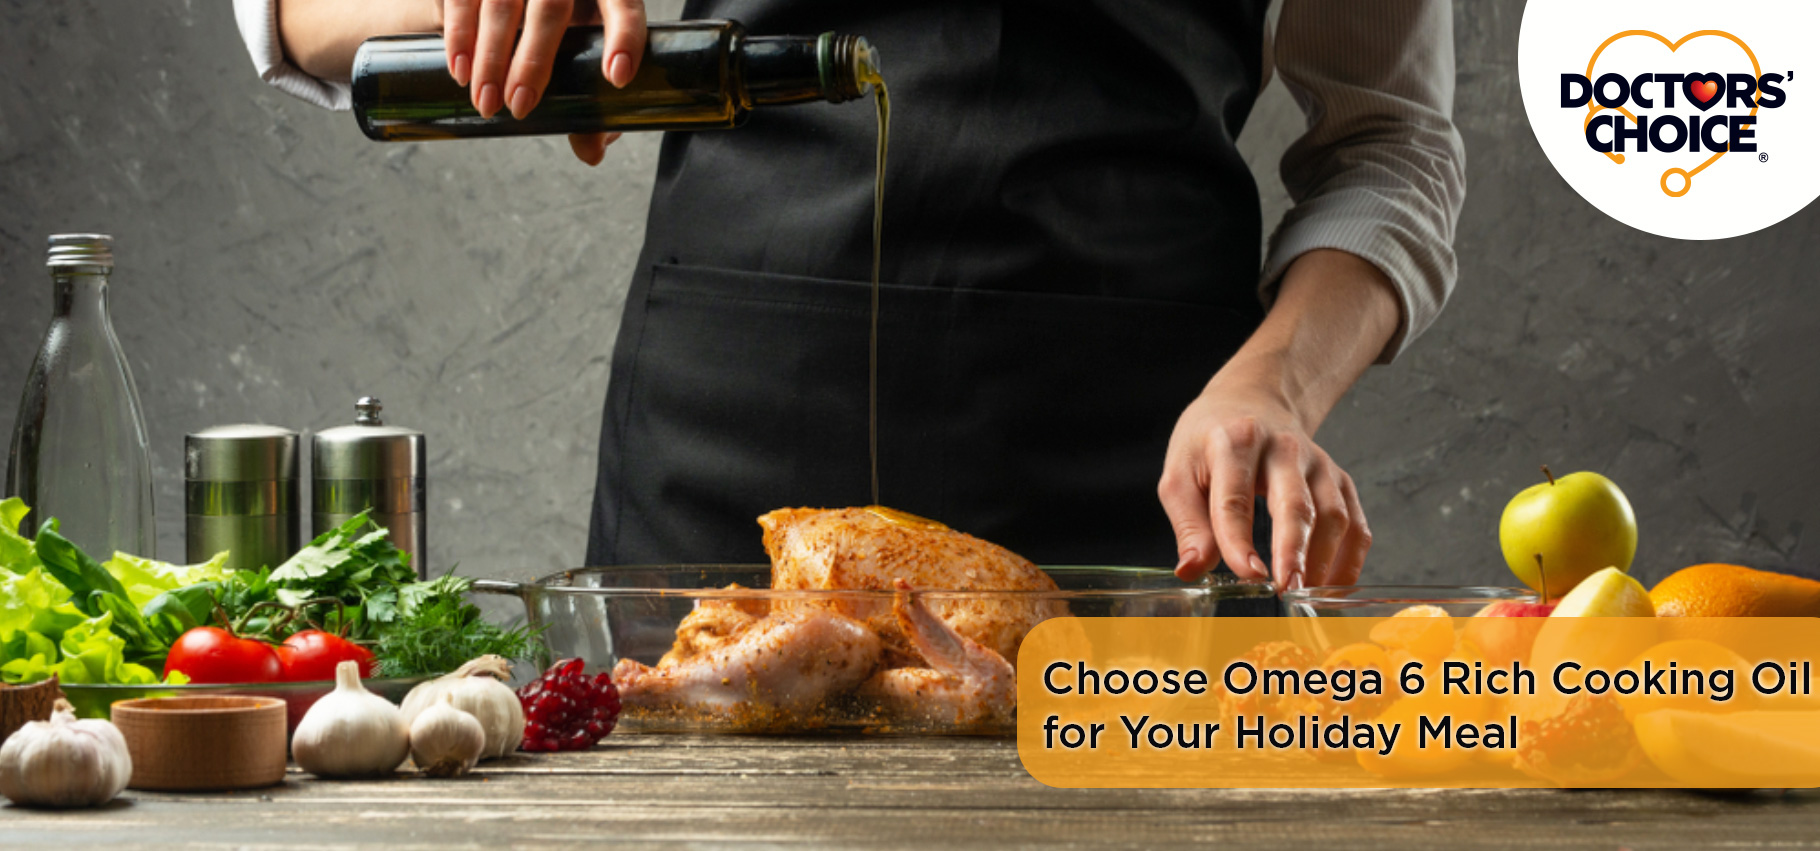 omega-6-rich-cooking-oil